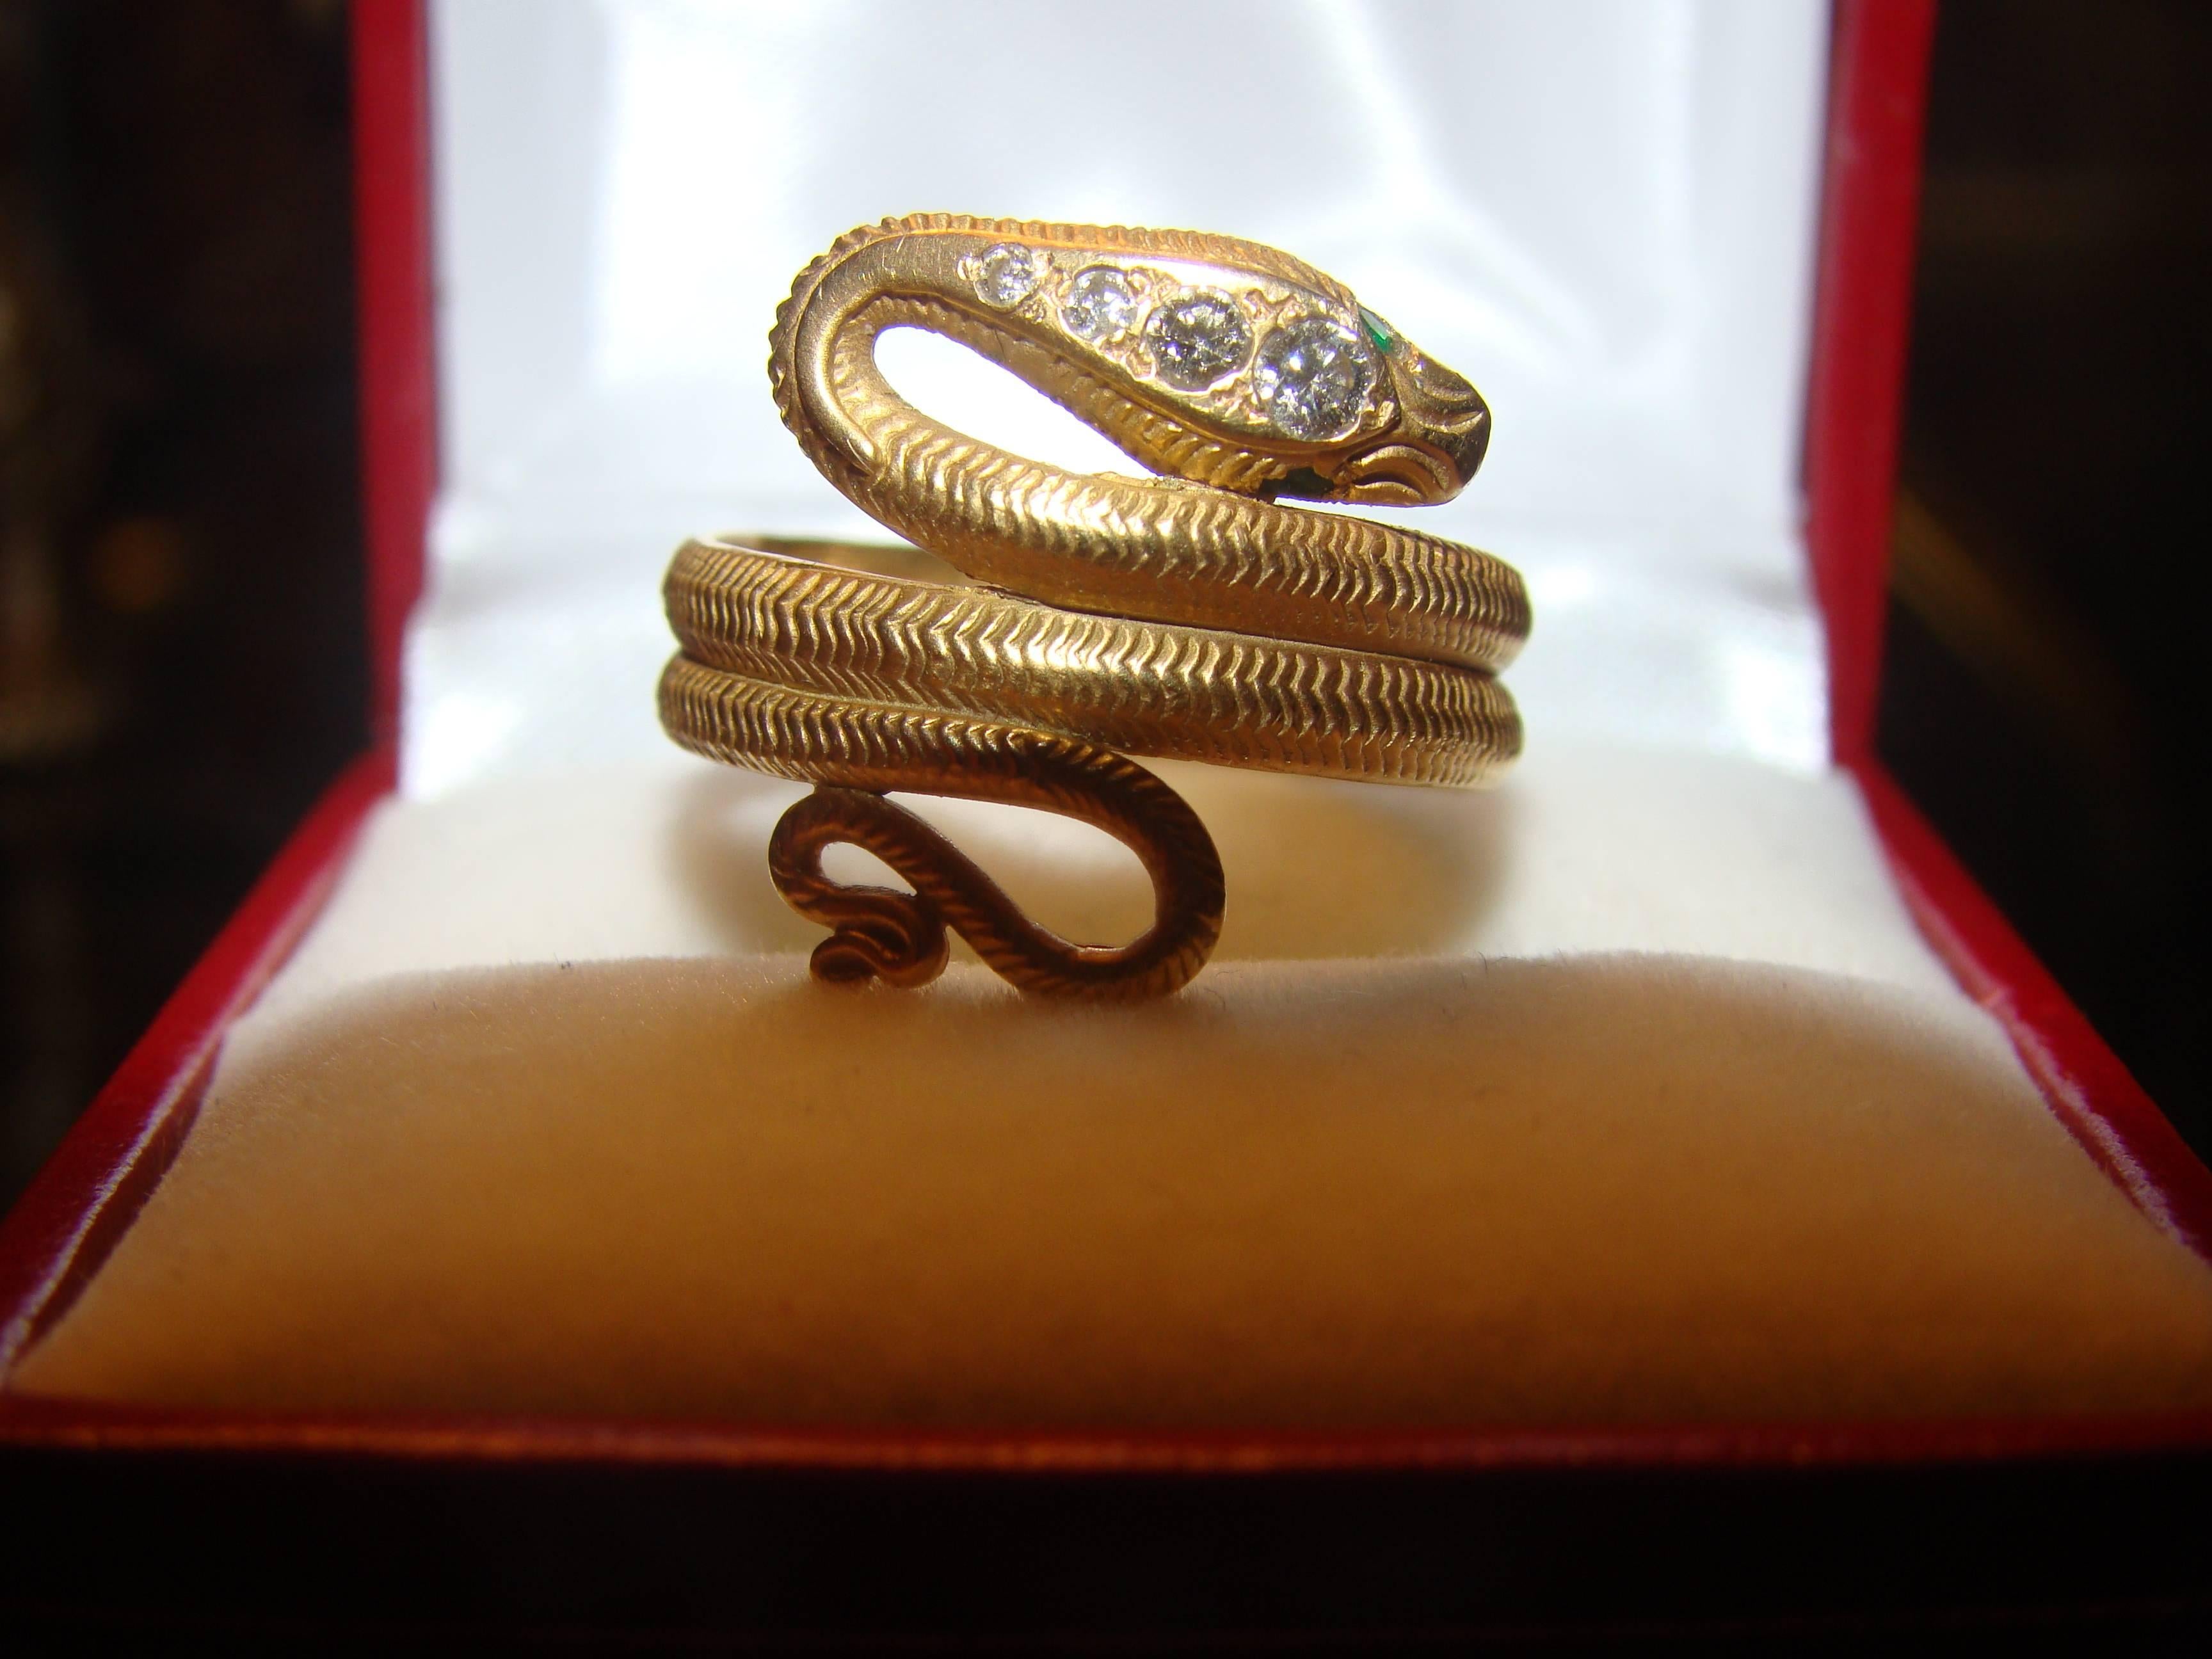 Mid-20th Century 18kt Gold Antique Snake Ring with Diamonds and Emerald Eyes